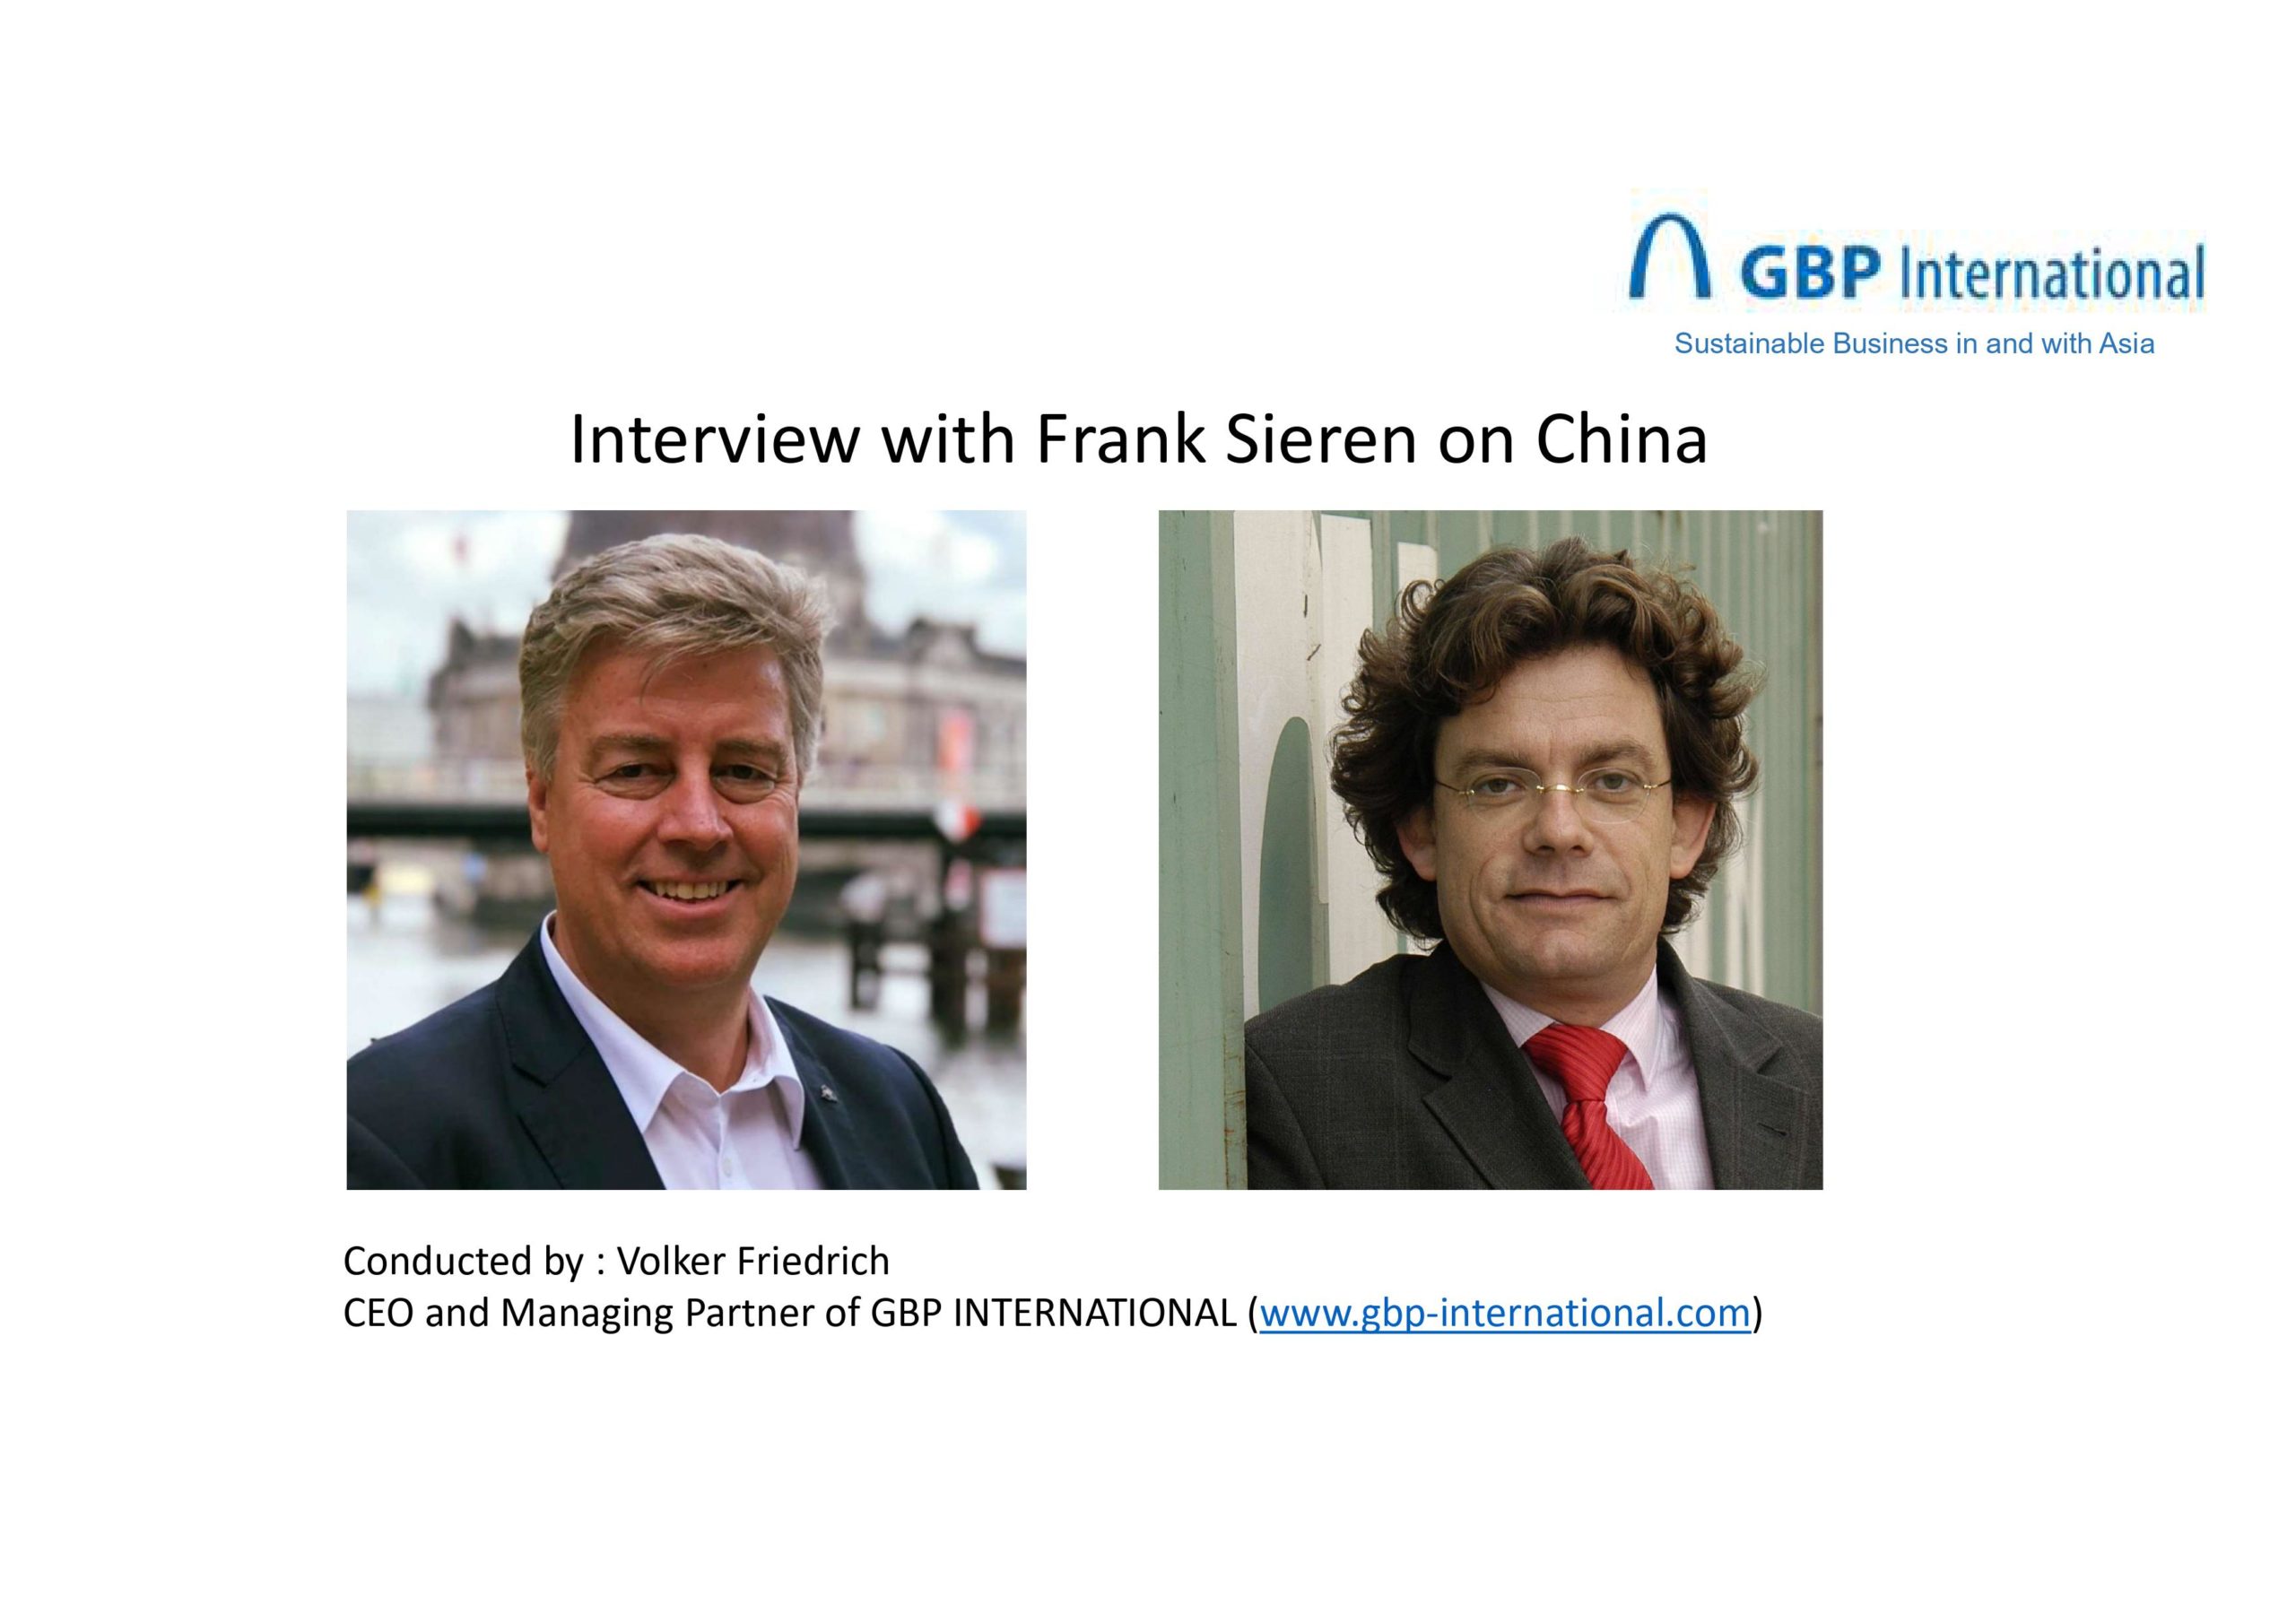 Interview: Insights on China and China’s strategies and policies towards the west with Frank Sieren and Volker Friedrich